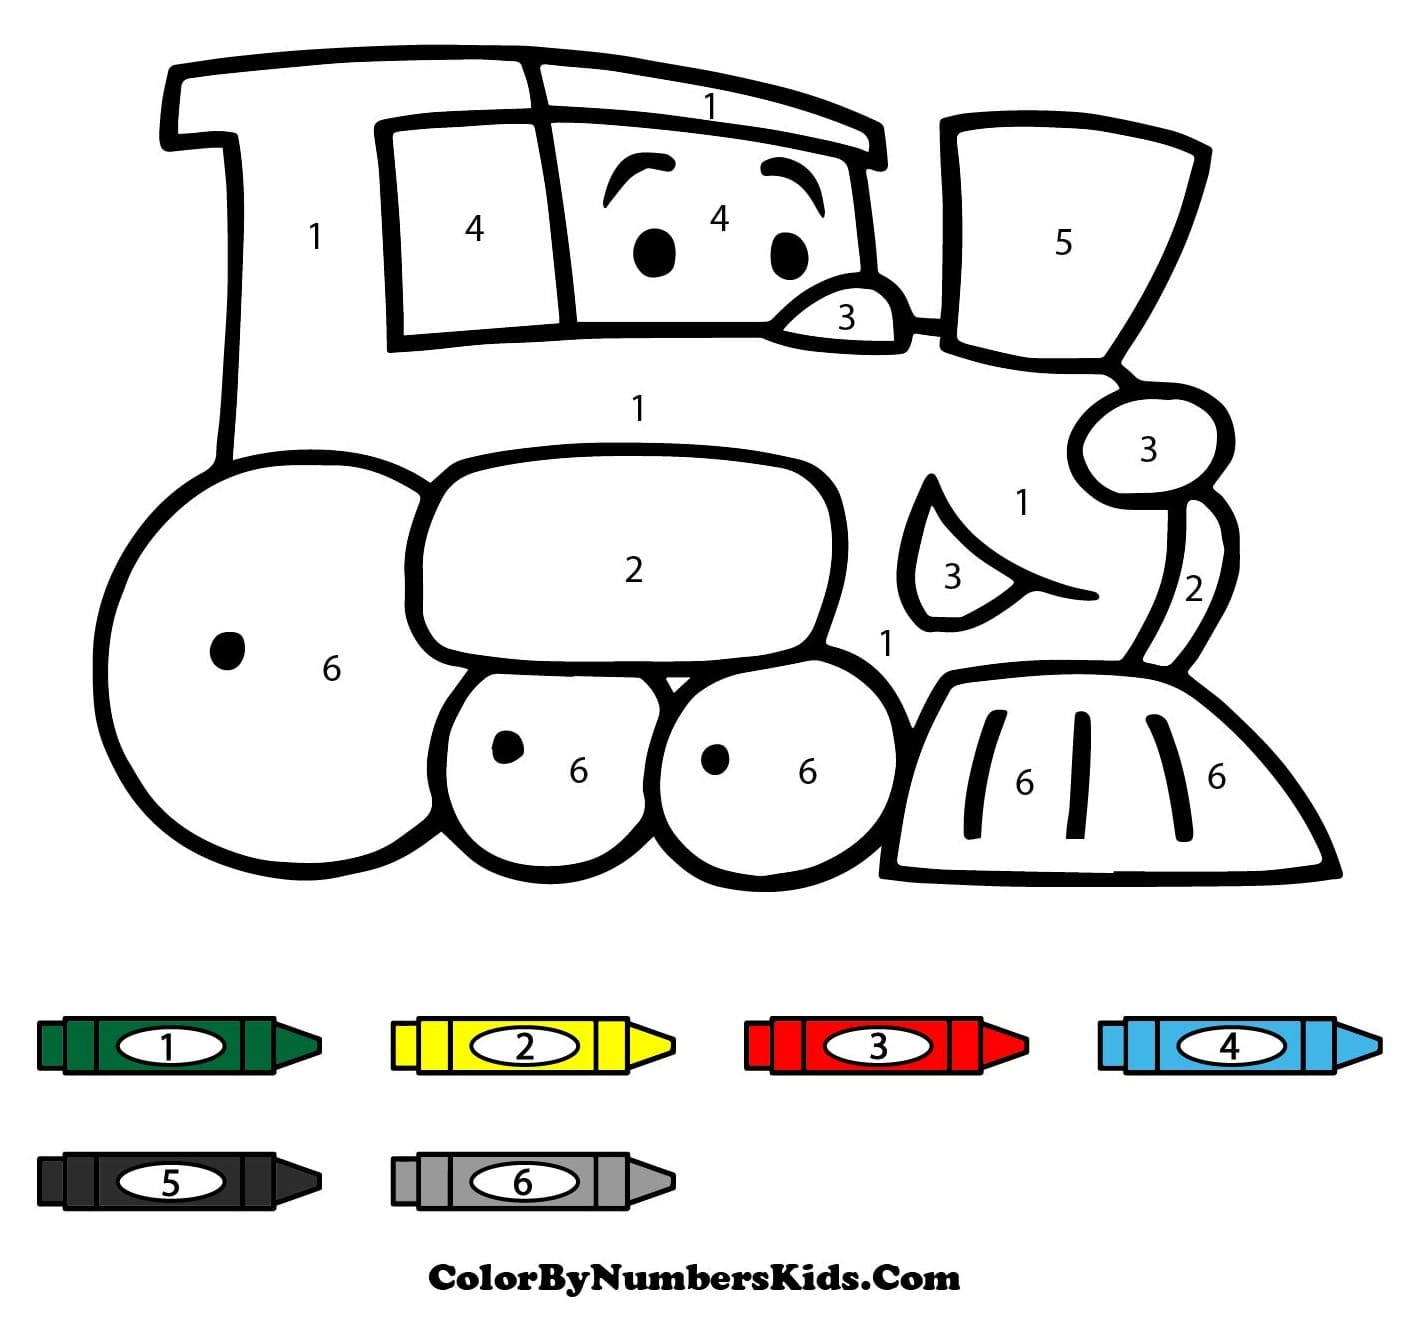 Cartoon Train Color By Number